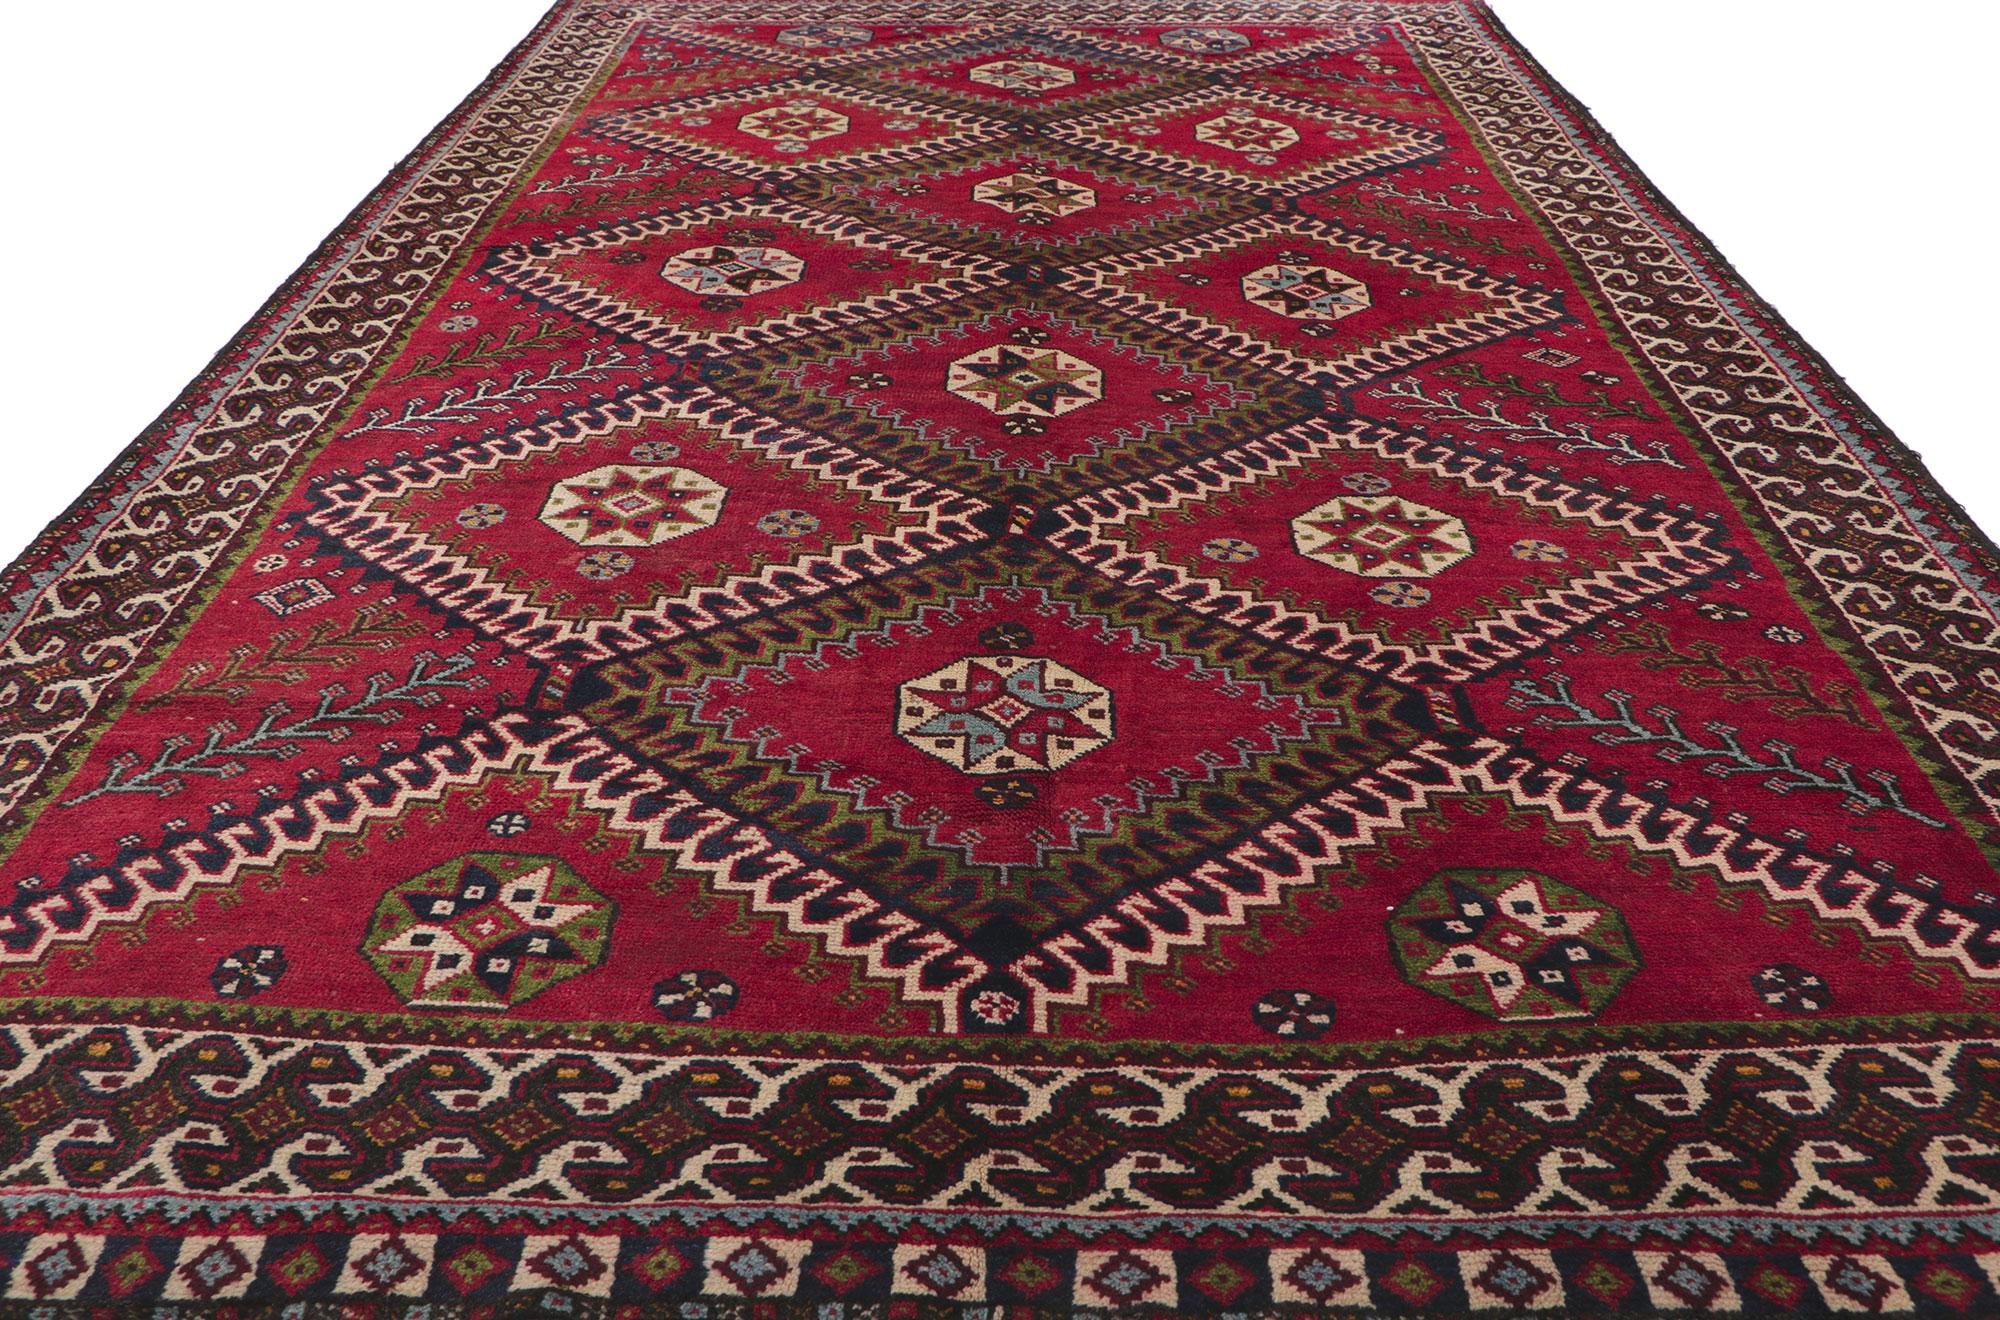 Vintage Persian Shiraz Rug, Luxury Lodge Meets Tribal Enchantment In Good Condition For Sale In Dallas, TX